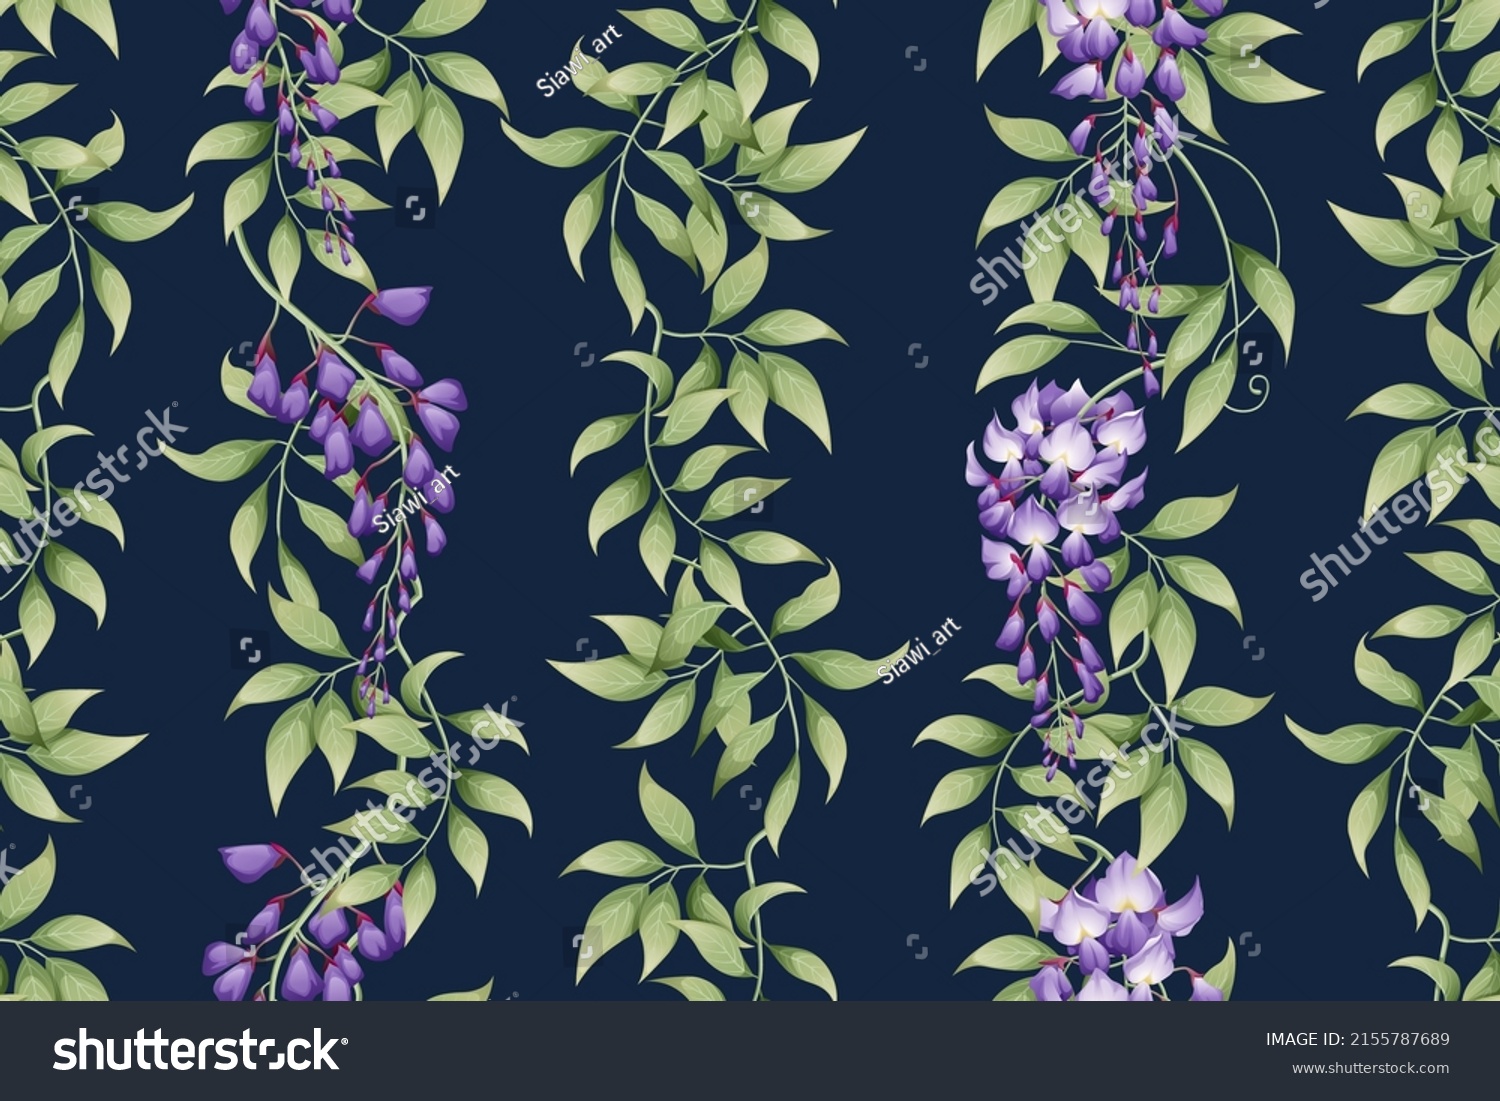 SVG of Seamless vertical pattern with purple wisteria and green leaves. Wallpaper, fabric, wrapping paper, scrapbooking paper svg